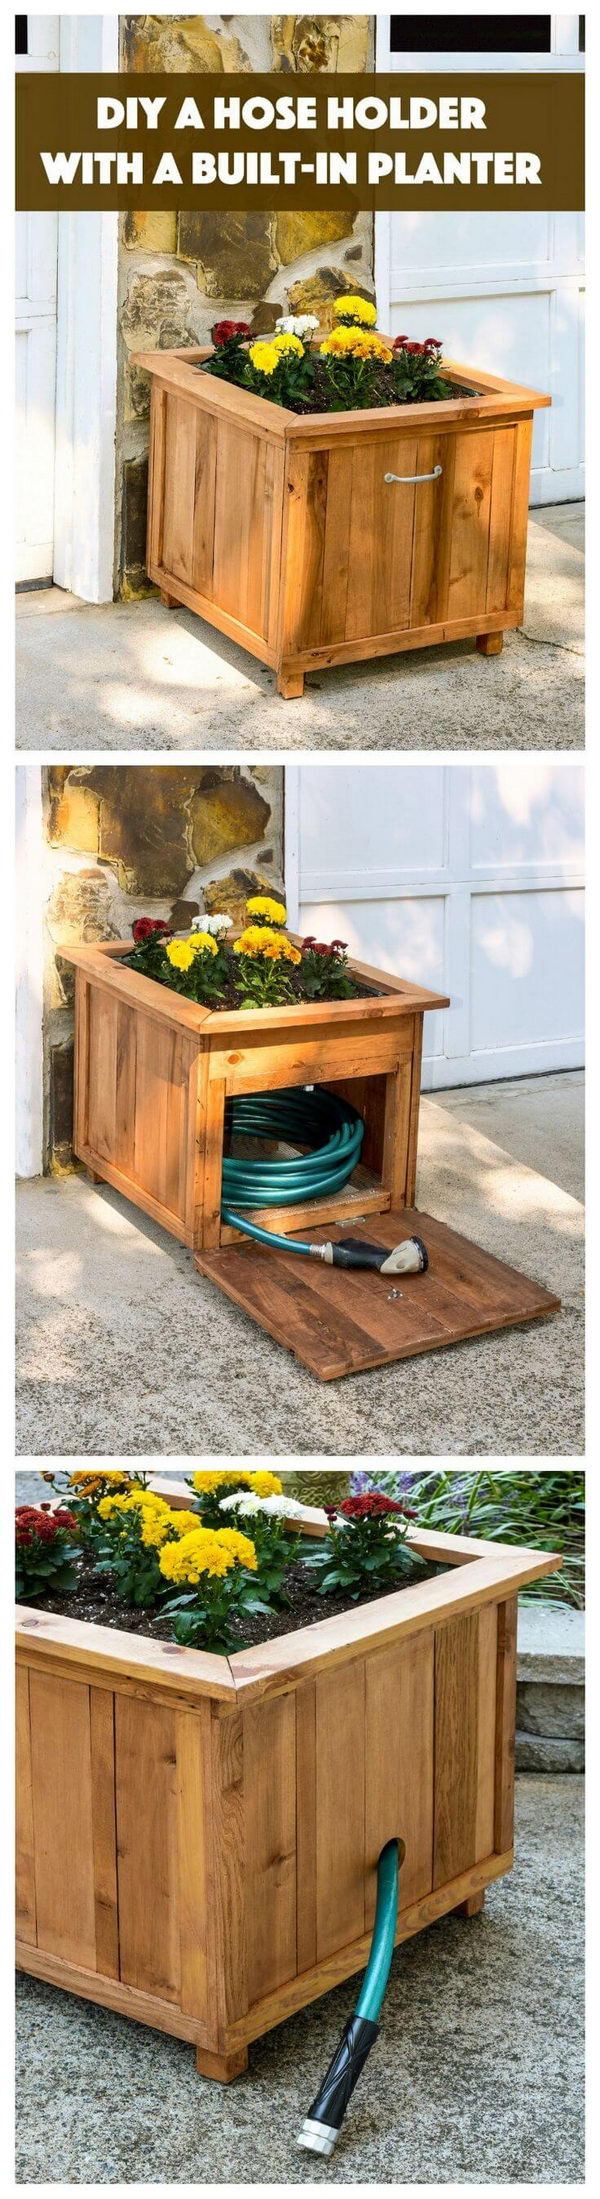 DIY Planters Box
 30 Creative DIY Wood and Pallet Planter Boxes To Style Up